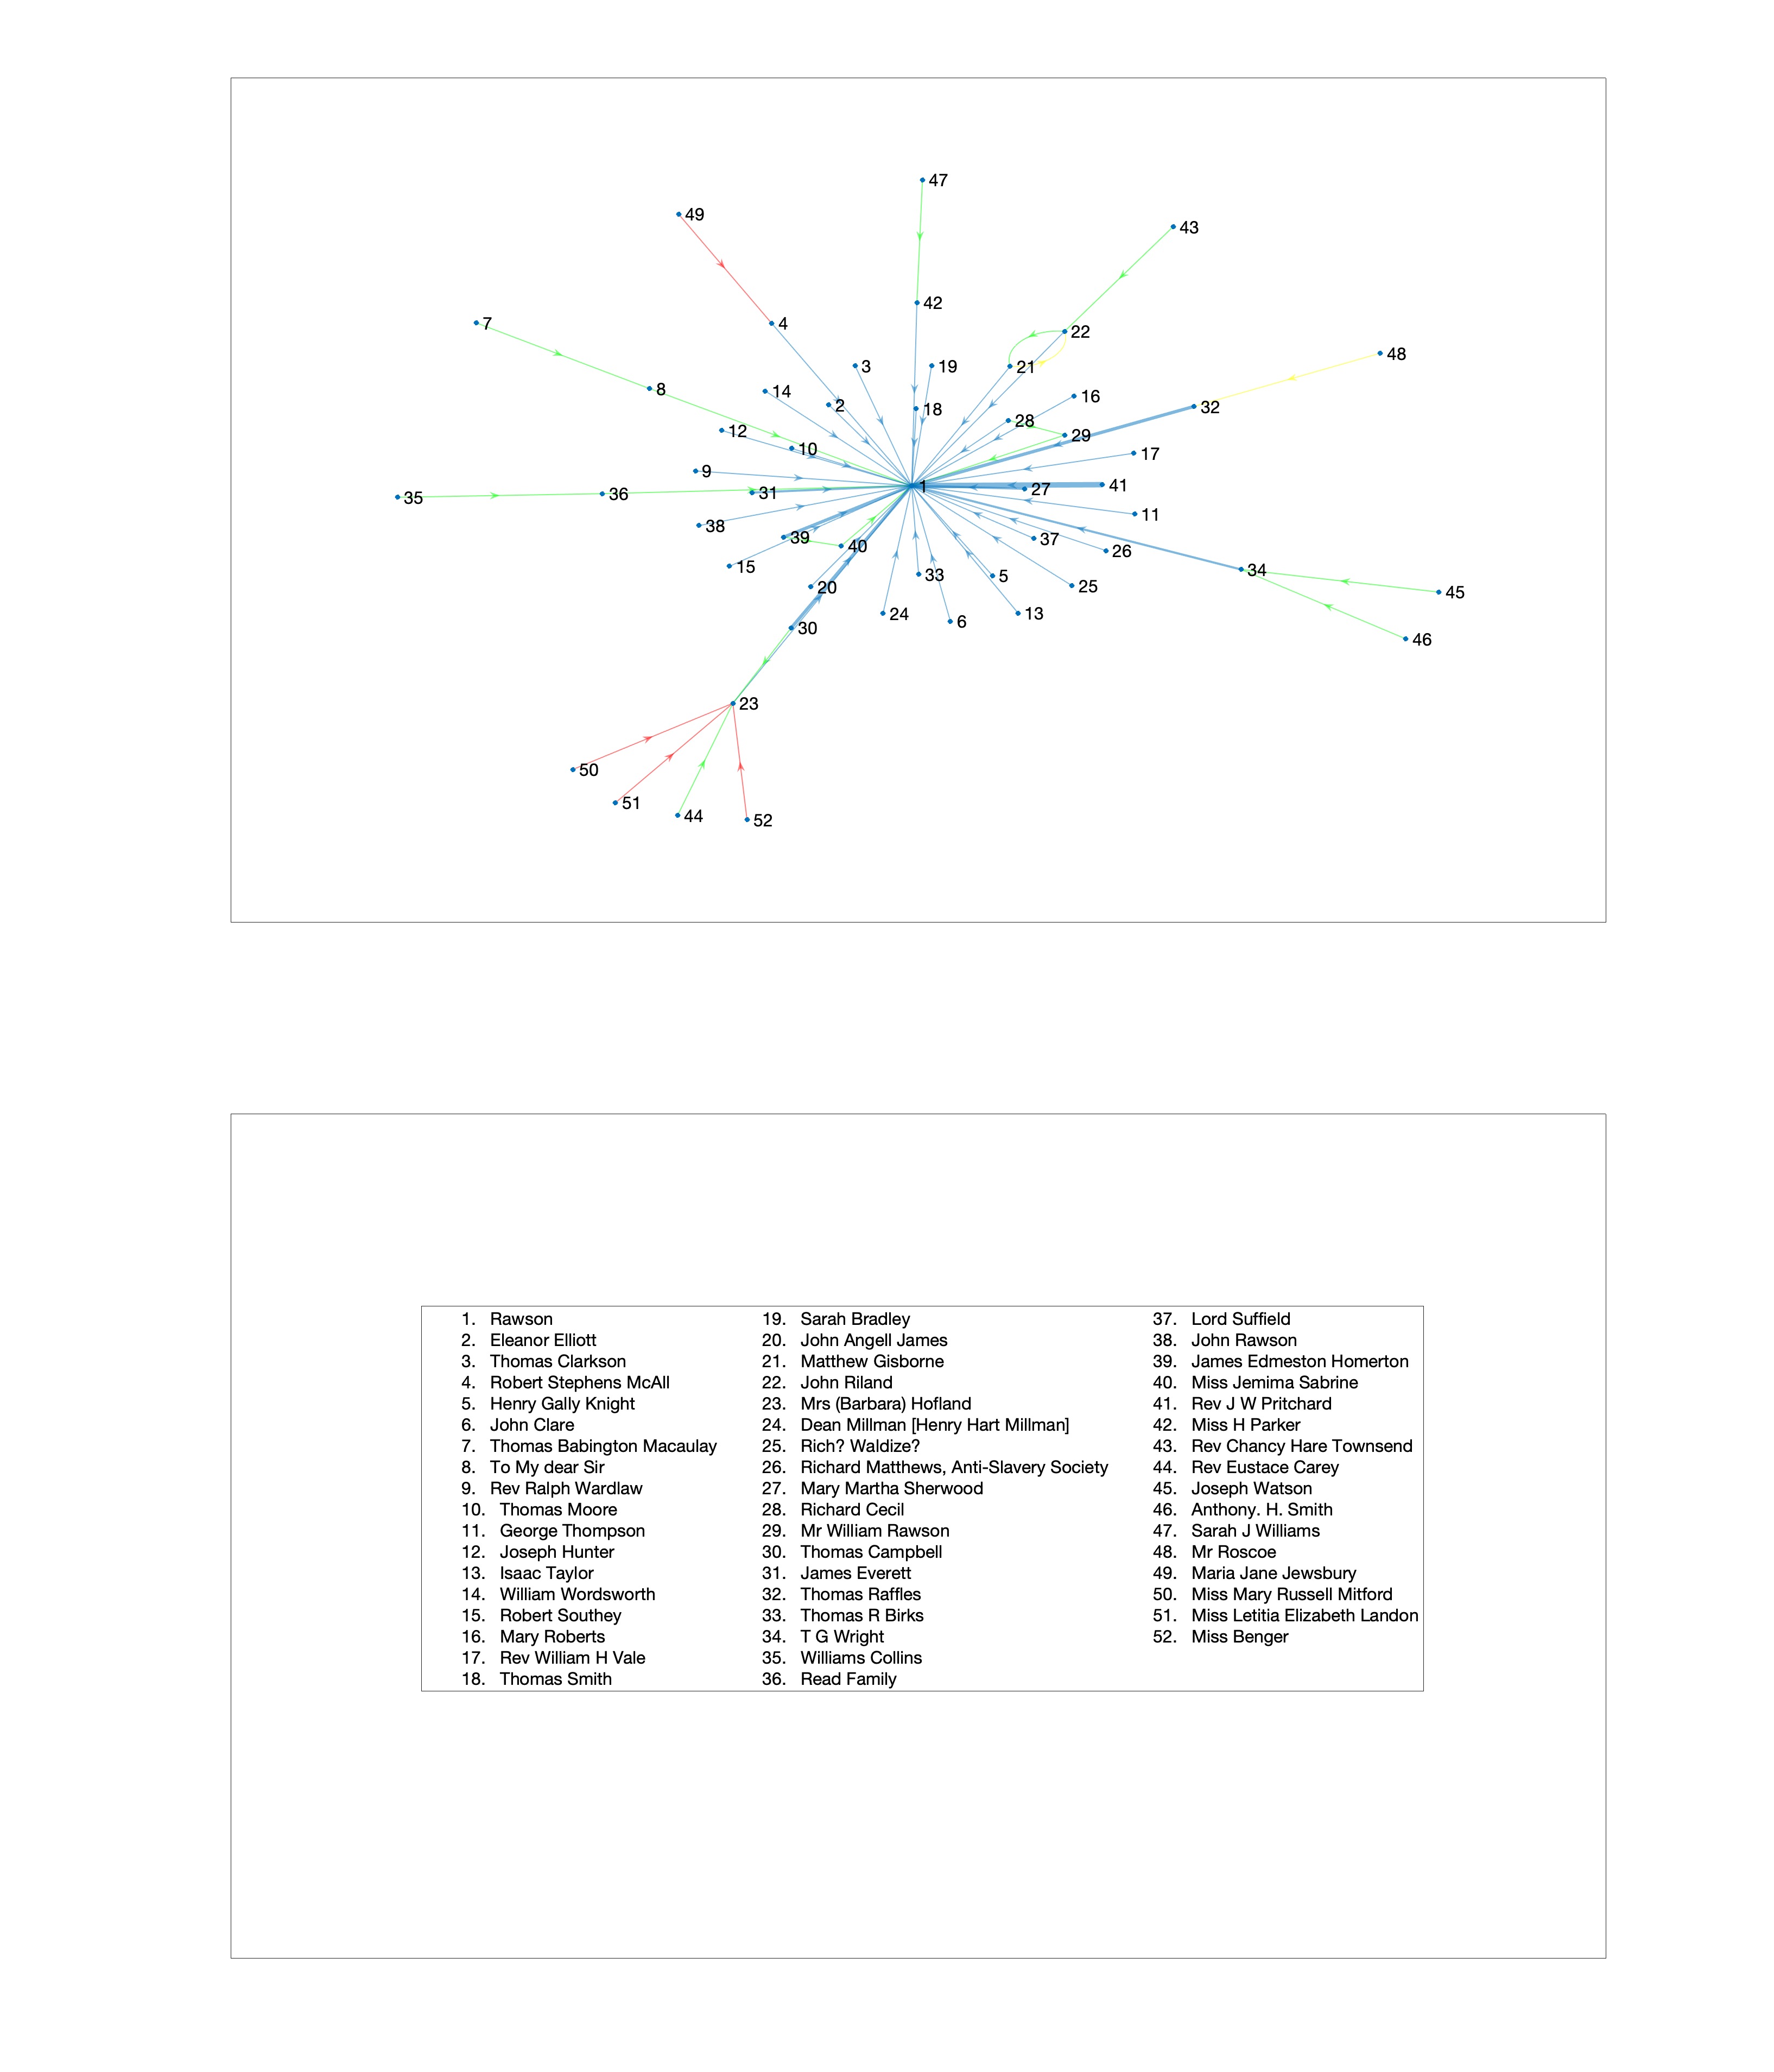 Network graph visualizing correspondents who did not contribute to the <em>Bow </em>and
            their recommendations for contributors